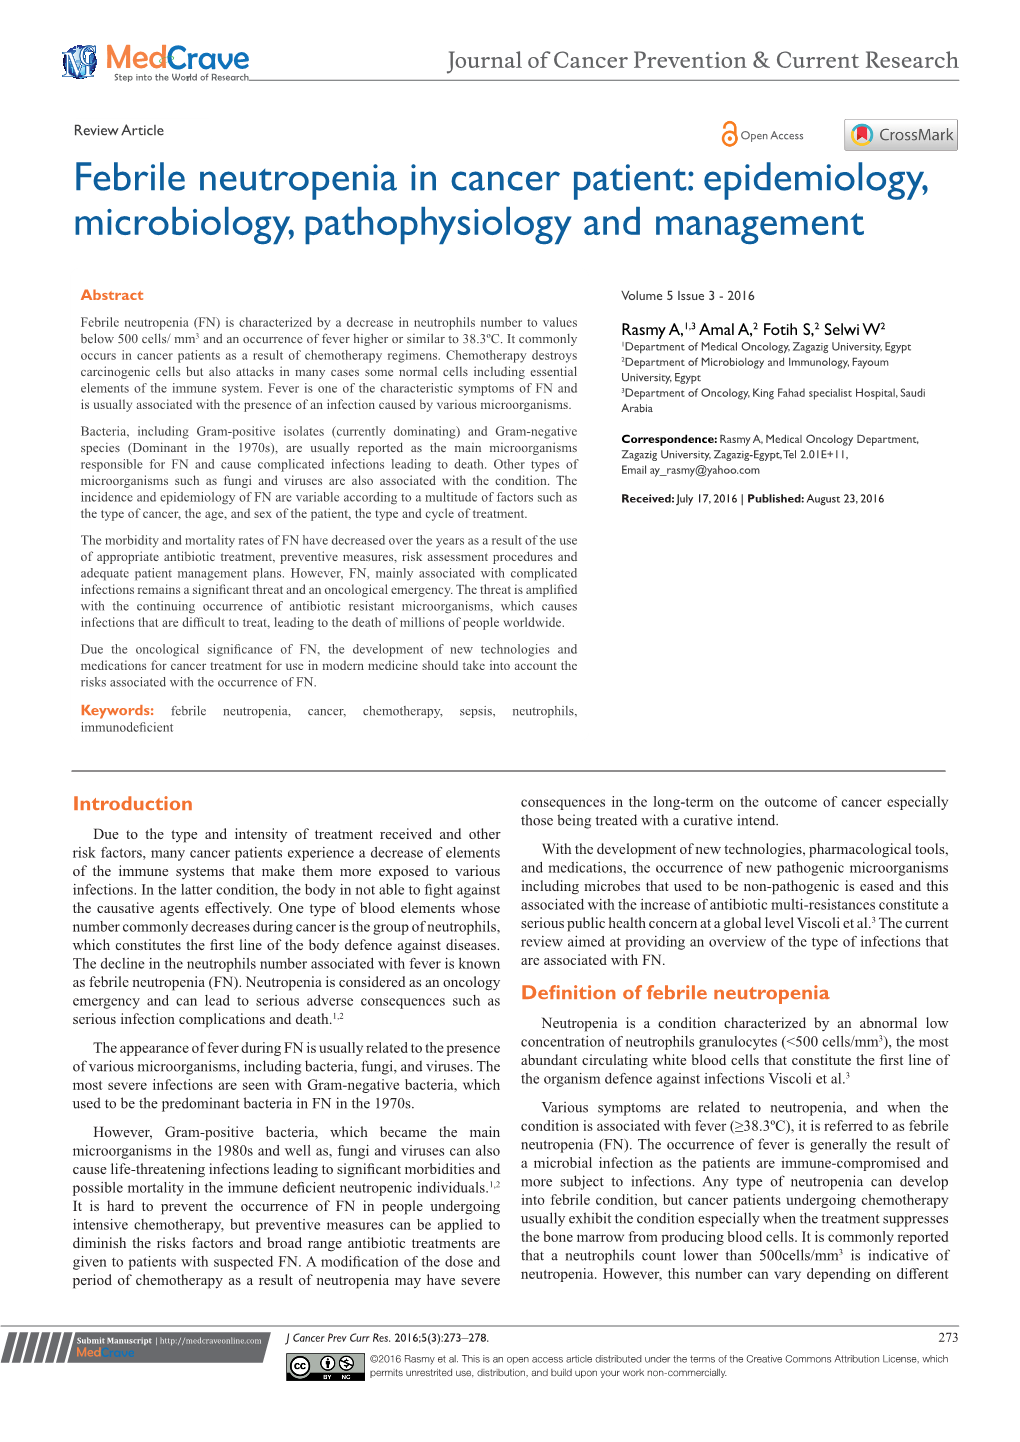 Febrile Neutropenia in Cancer Patient: Epidemiology, Microbiology, Pathophysiology and Management